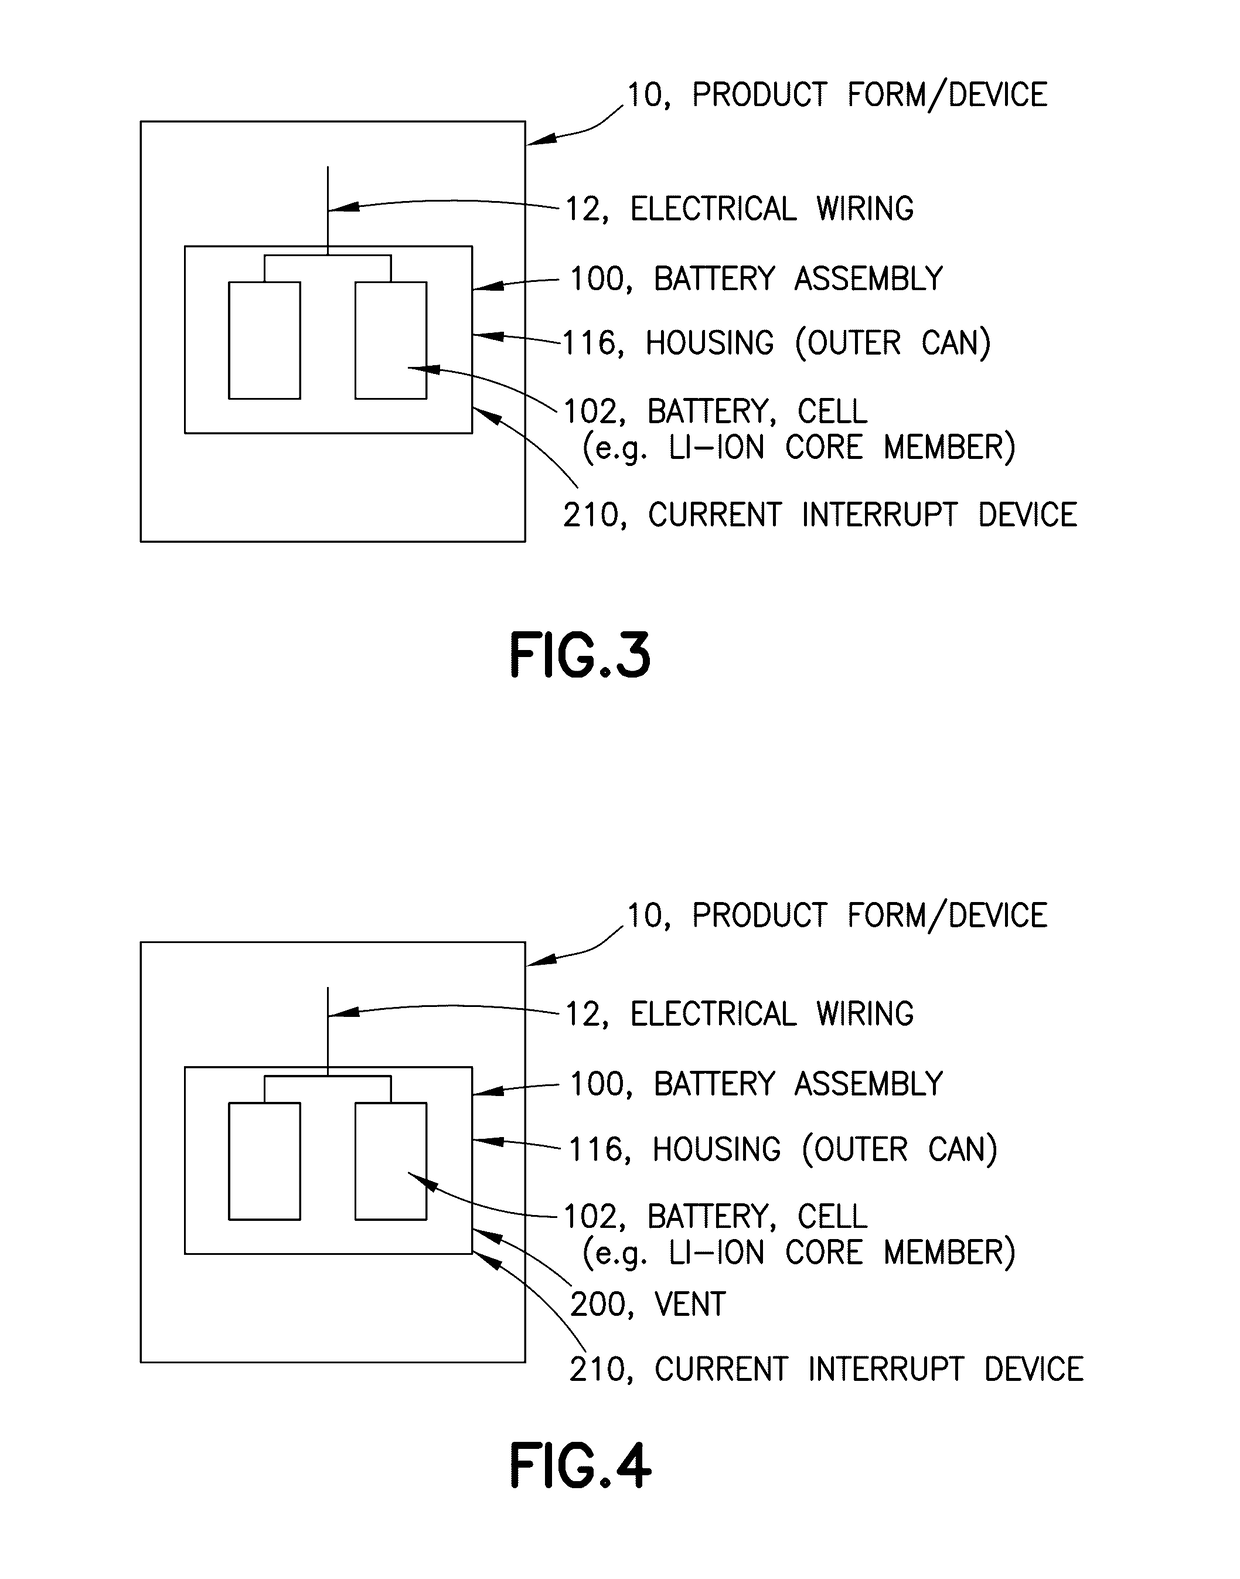 Energy storage device and related methods